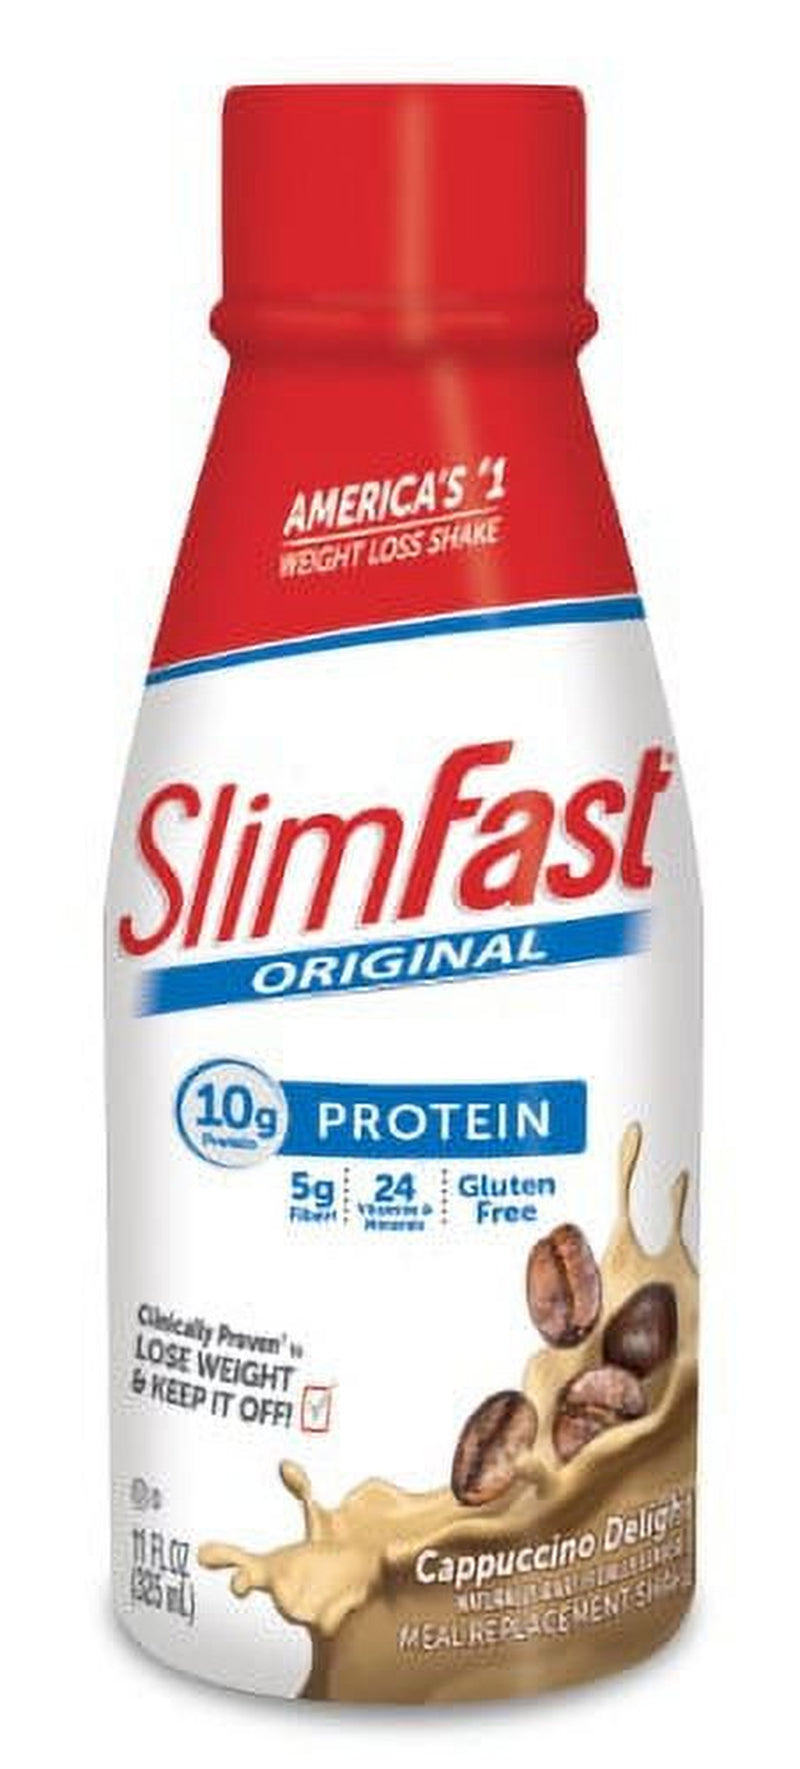 Silmfast ? Original Cappuccino Delight Meal Replacement Shakes (Pack of 3)